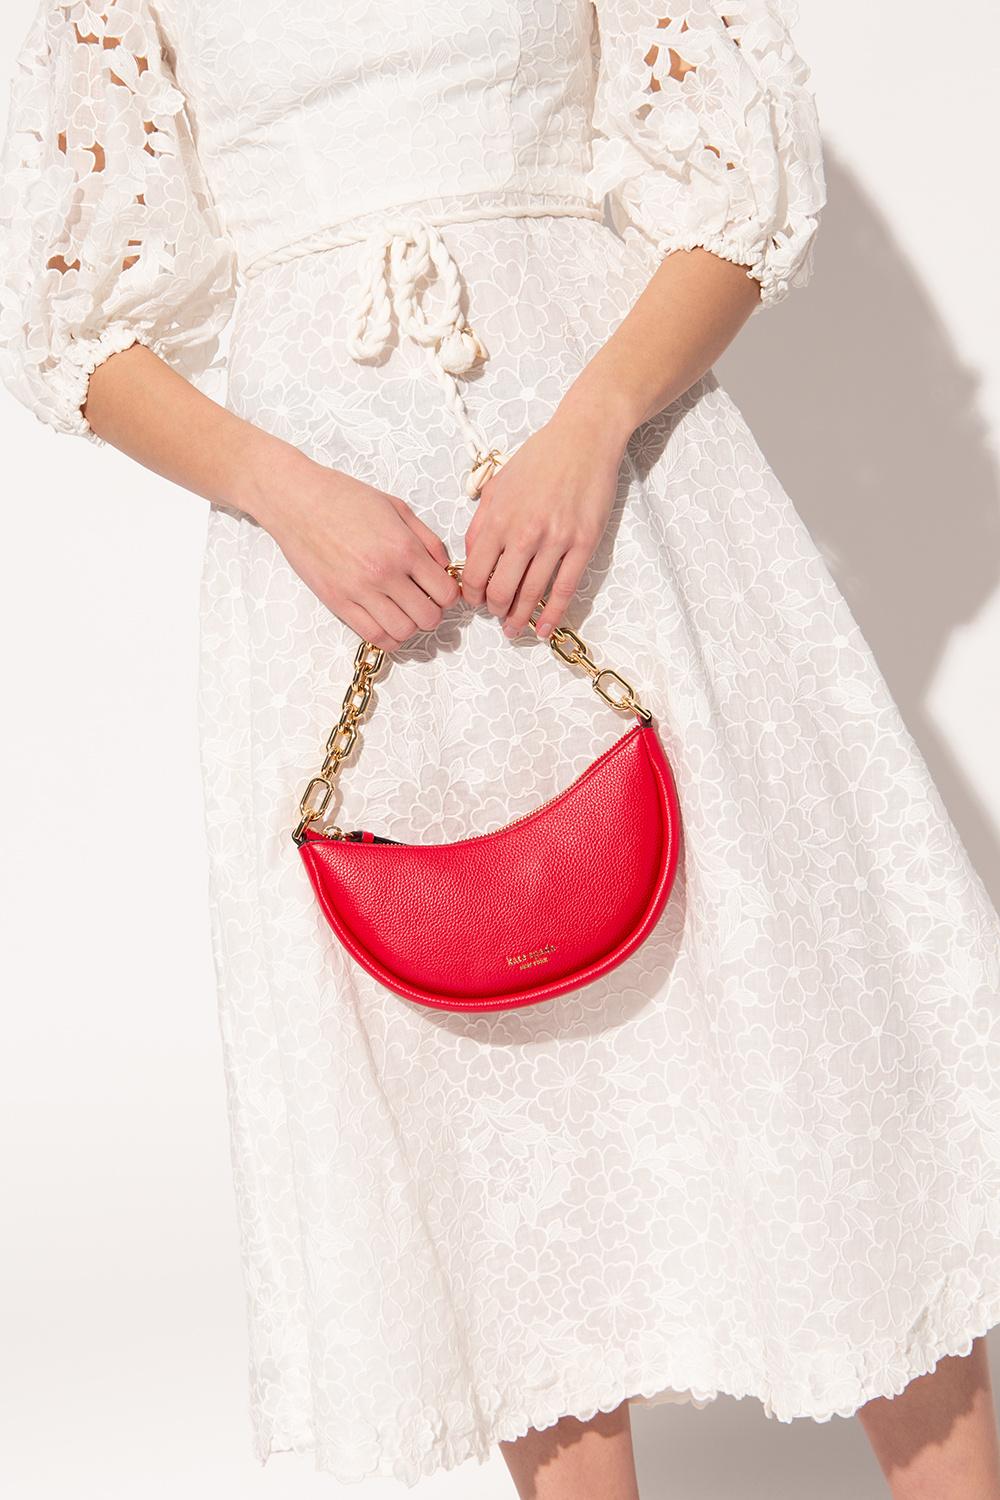 Kate Spade 'smile Small' Shoulder Bag in Red | Lyst